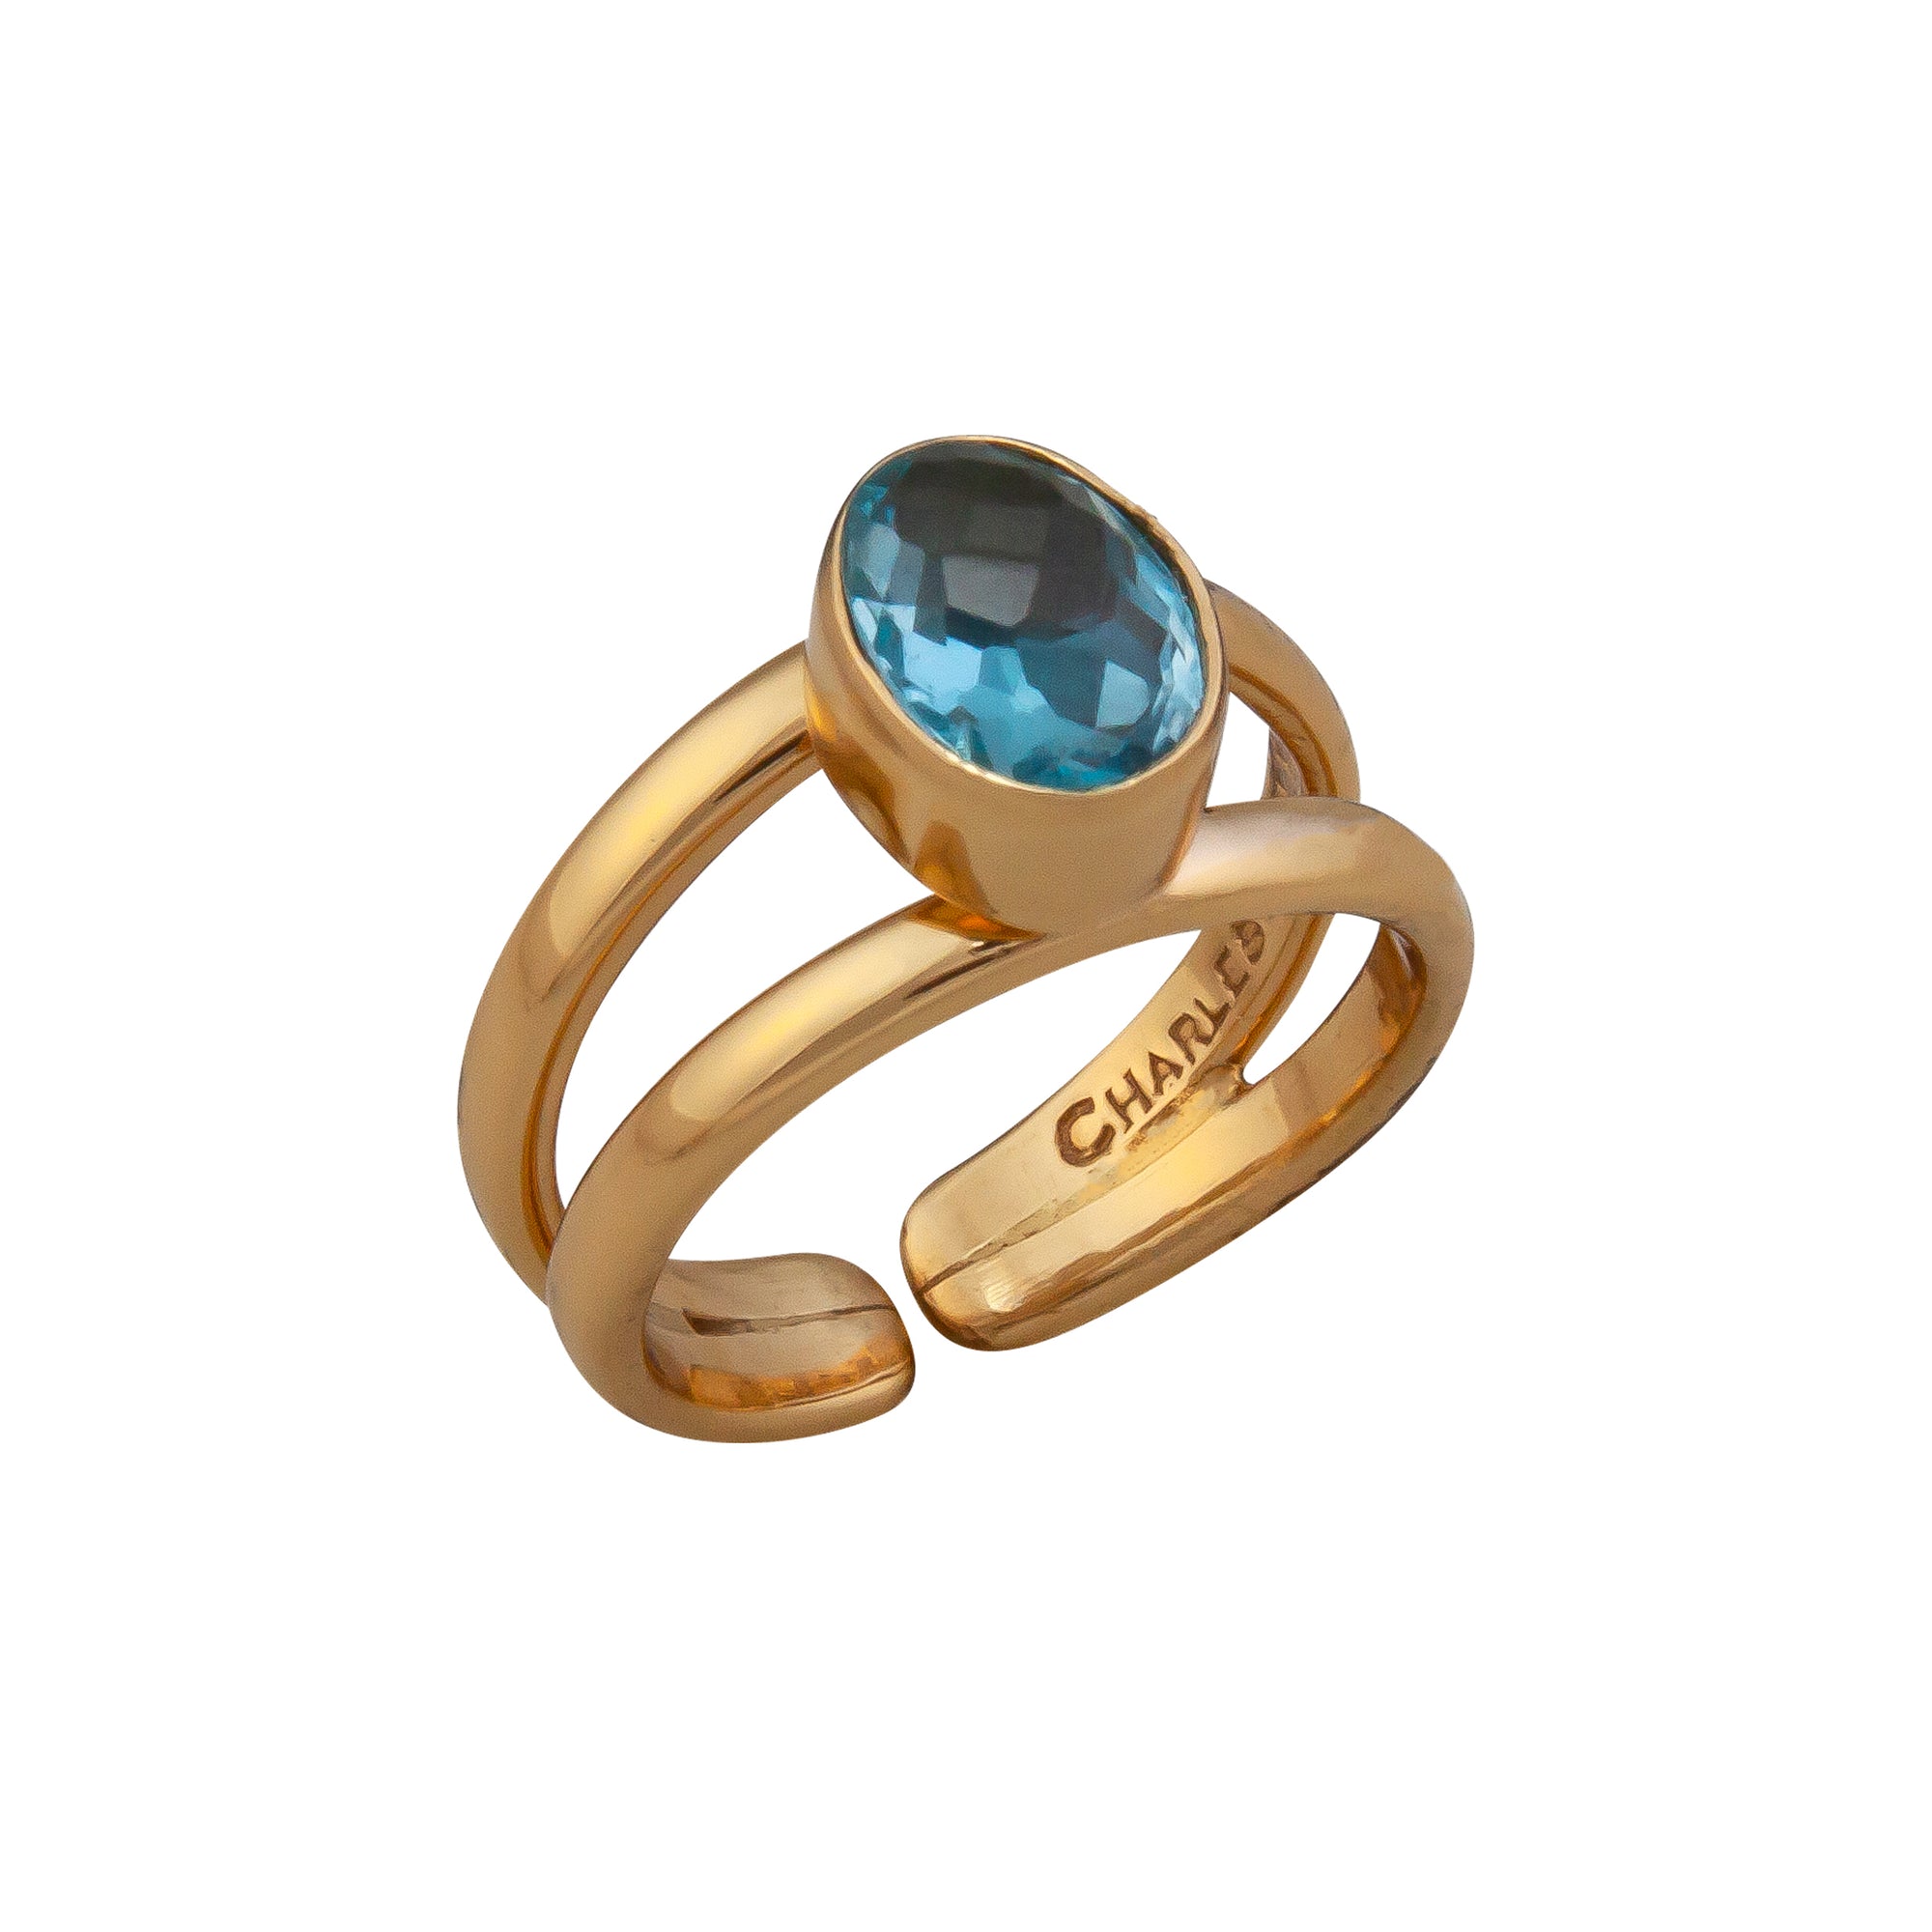 Alchemia Blue Topaz Double Band Adjustable Ring | Charles Albert Jewelry